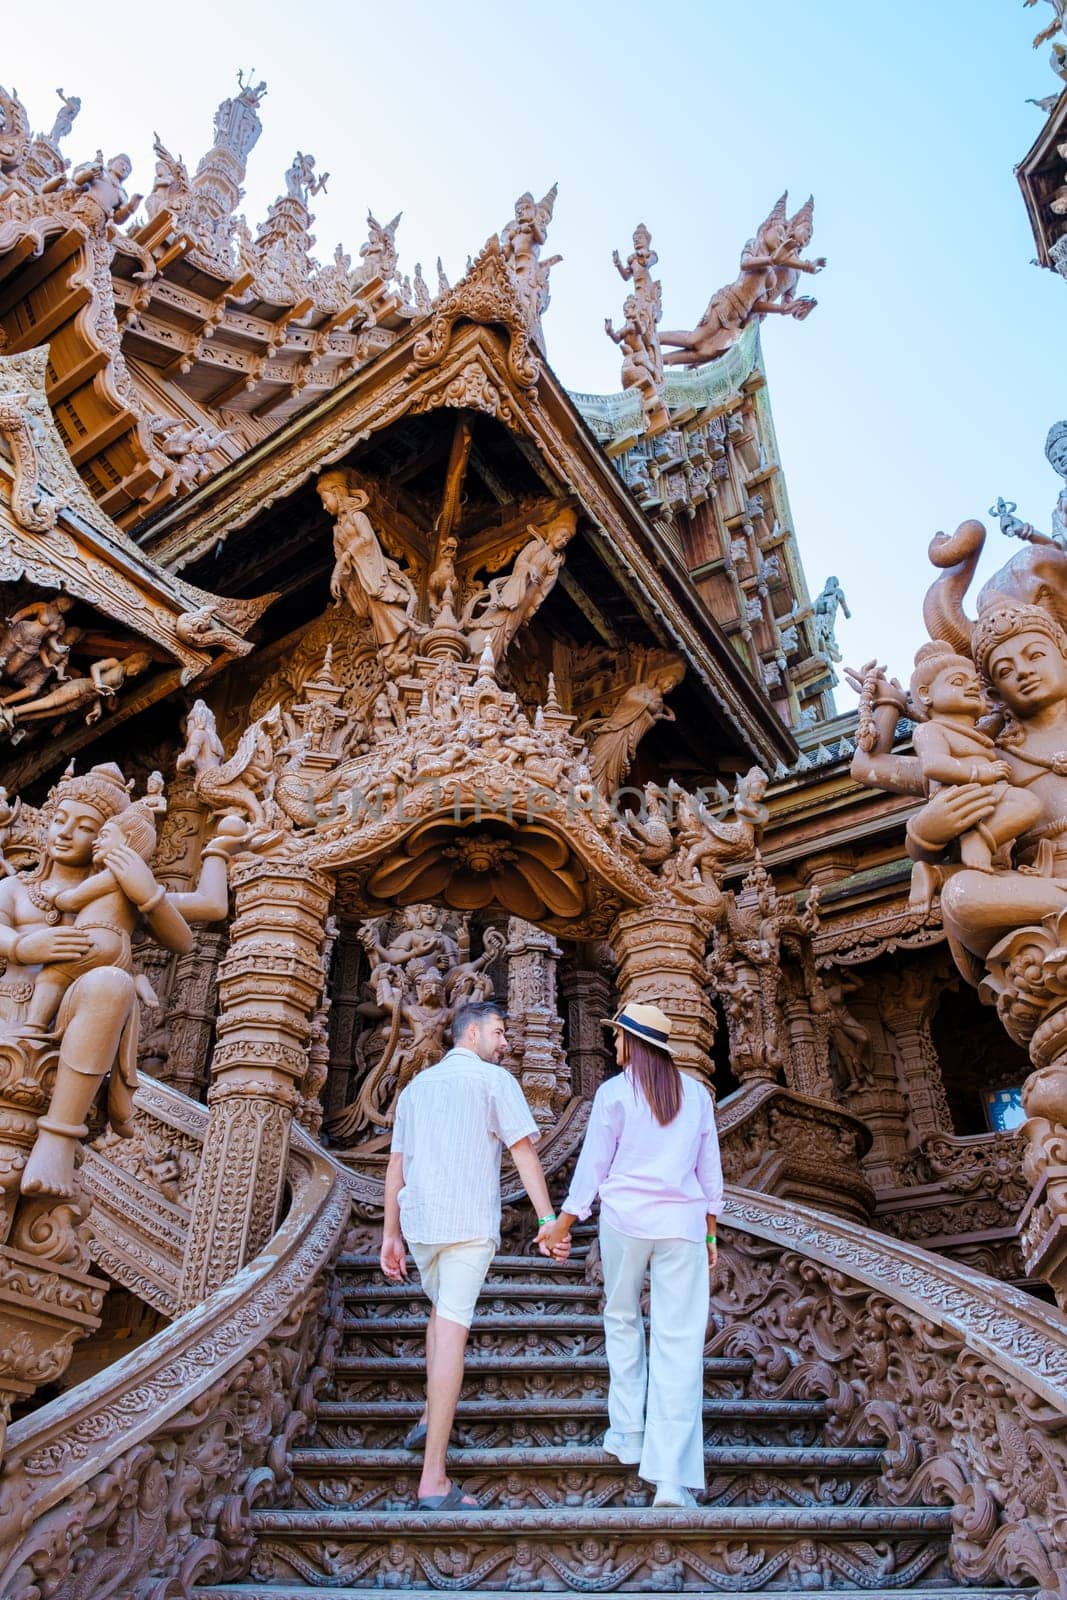 A couple visit The Sanctuary of Truth wooden temple in Pattaya Thailand by fokkebok